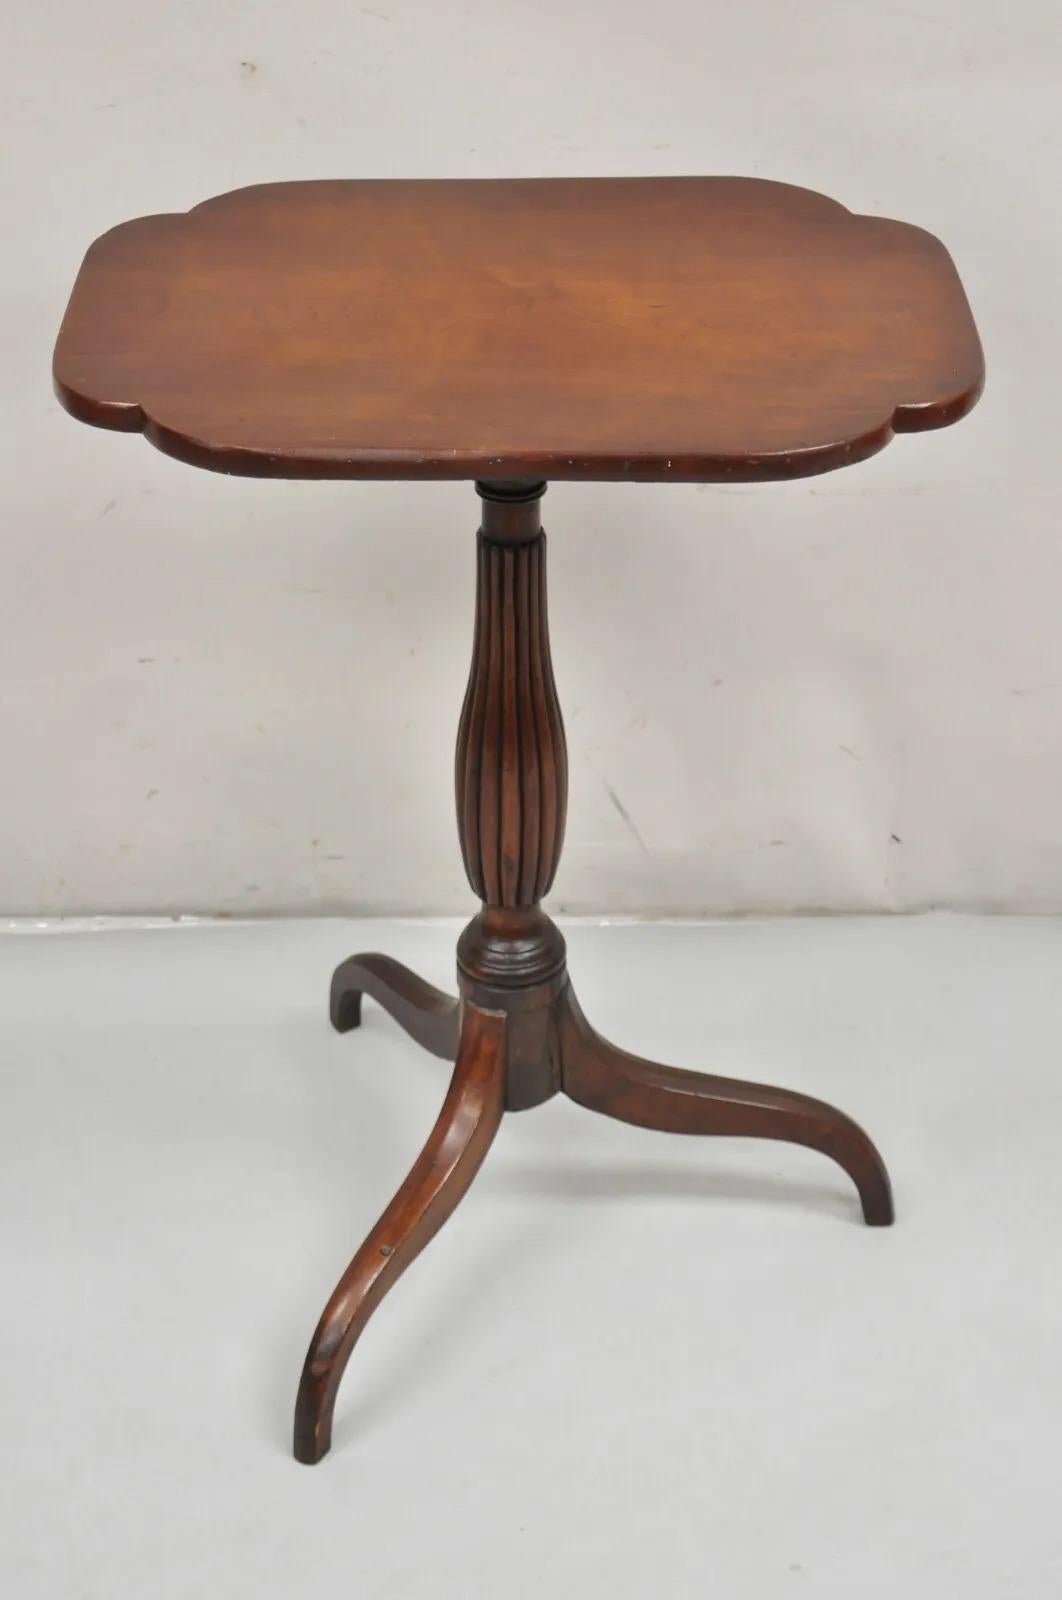 Antique Sheraton Style Mahogany Tilt Top Tea Table Candle Stand For Sale 6